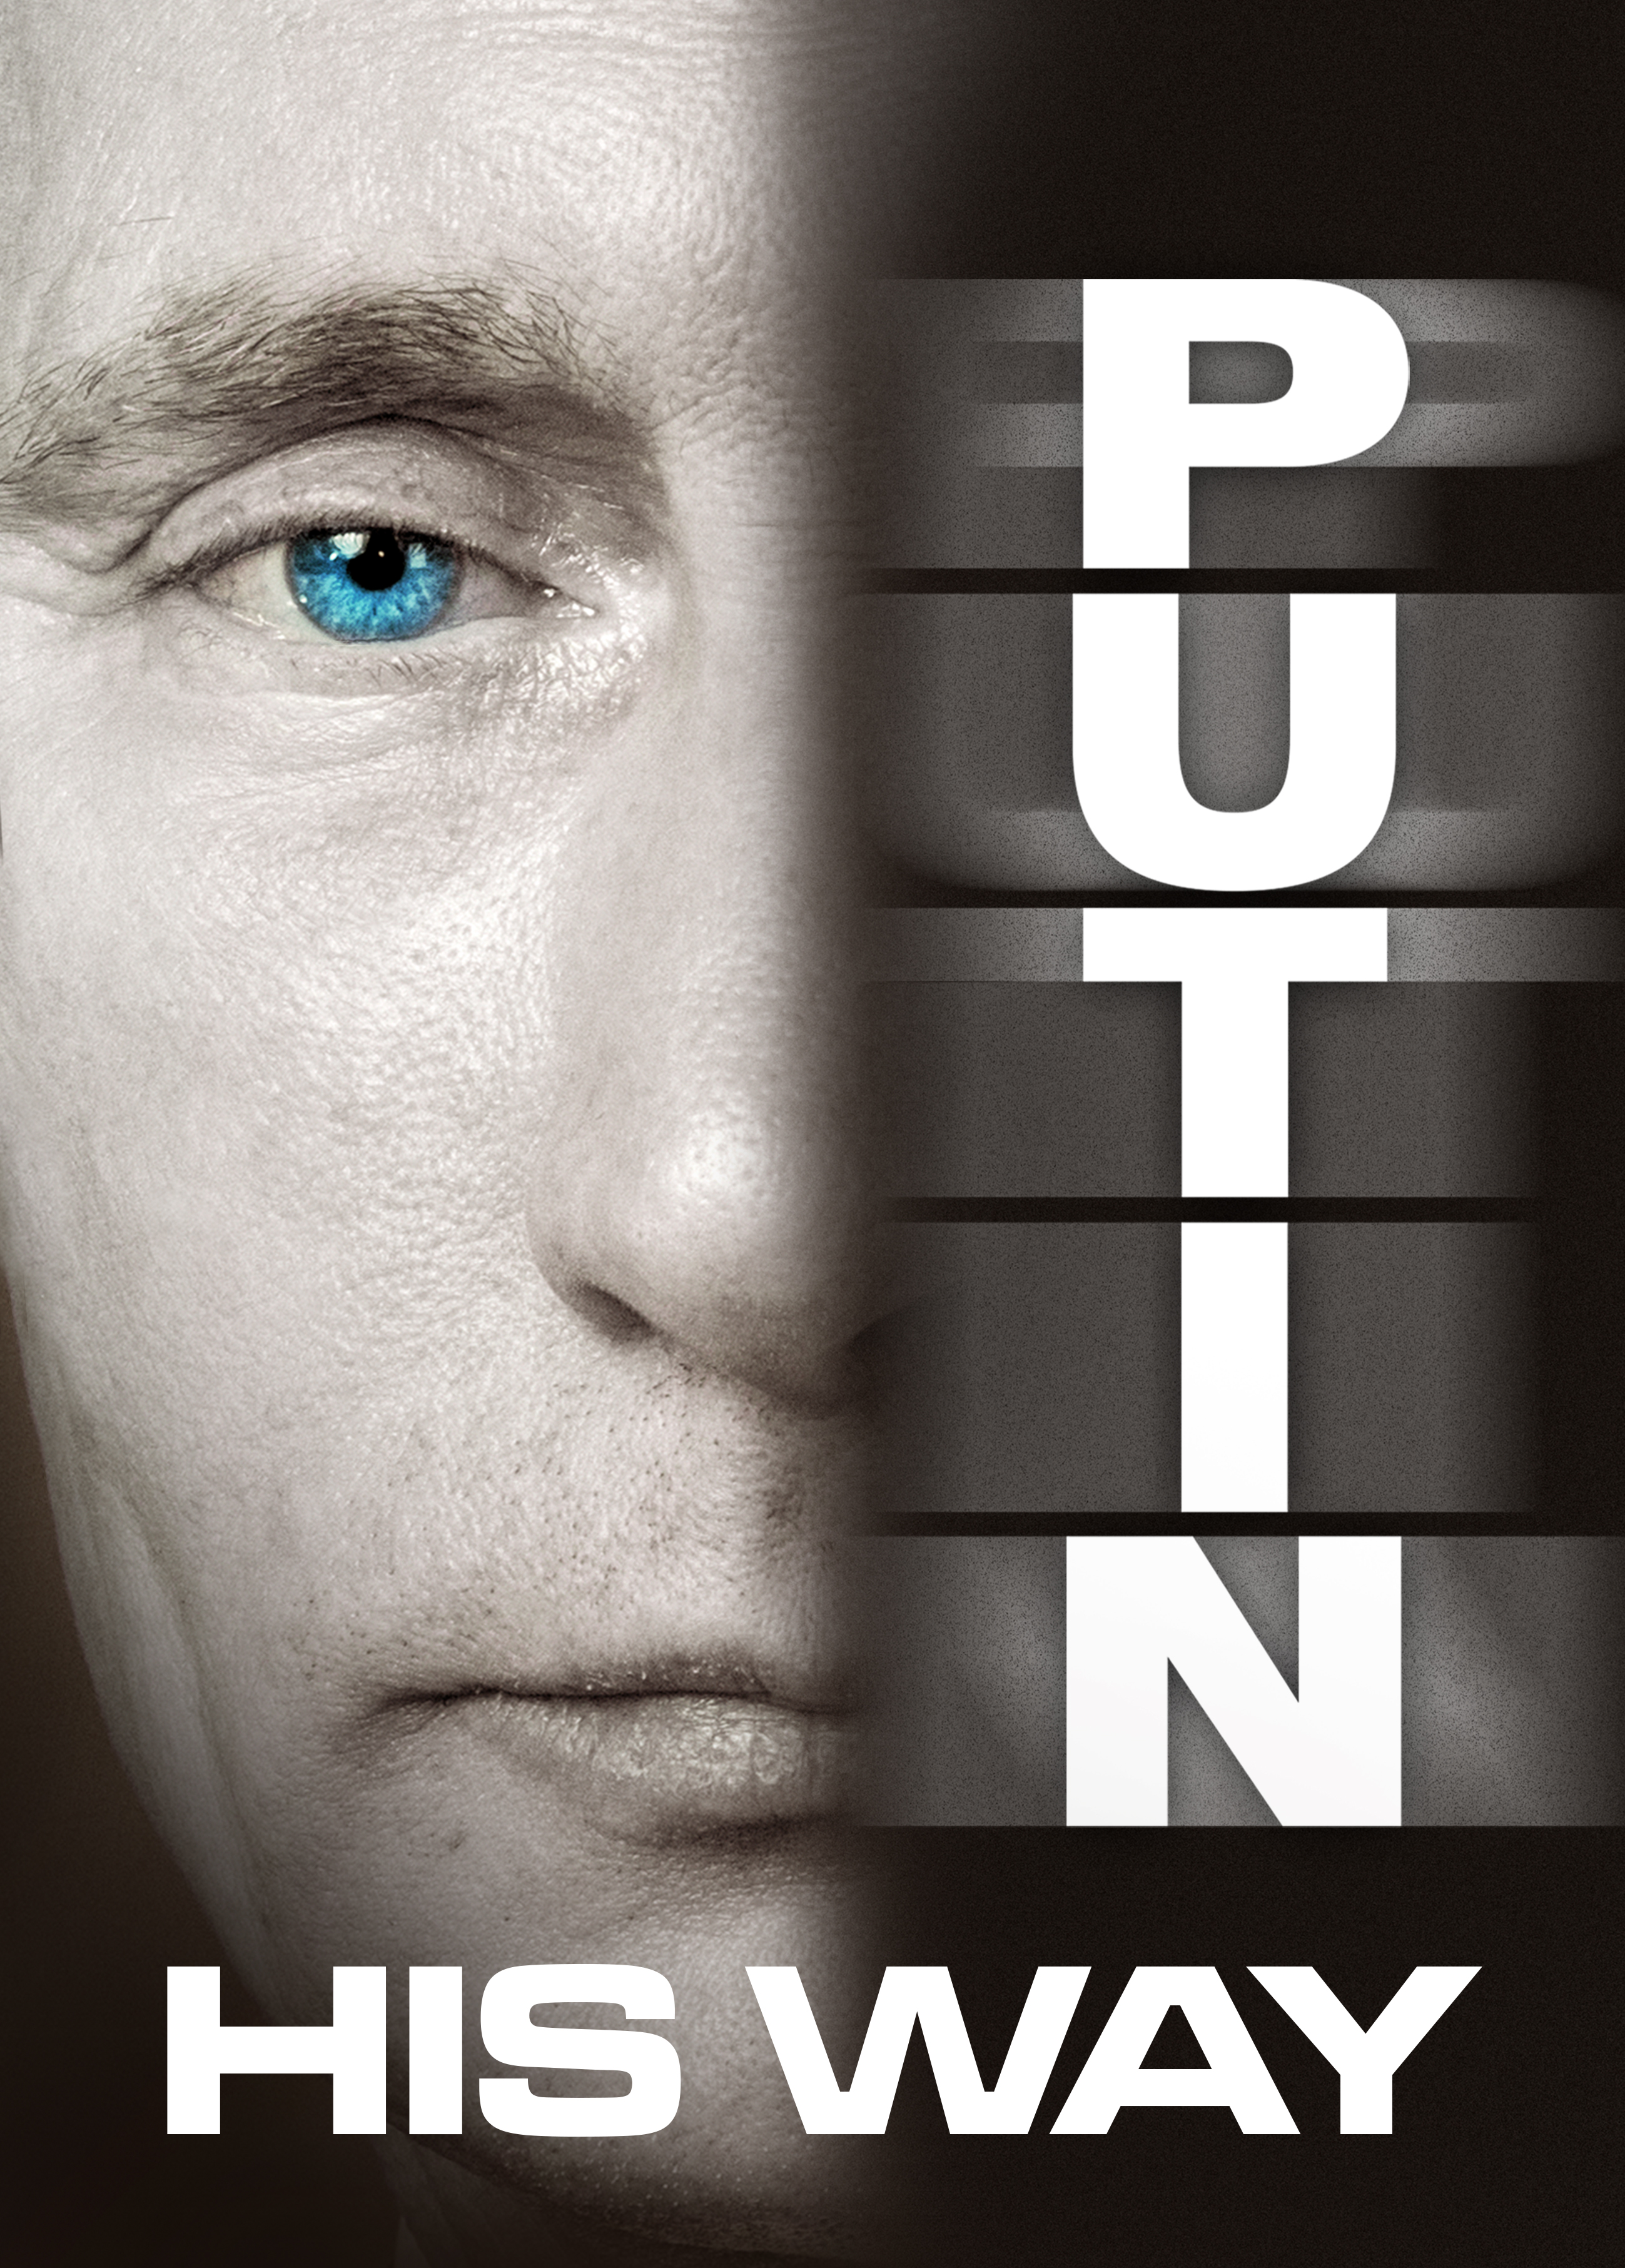 NEW DOCUMENTARY PROJECT PUTIN IS DUE TO PREMIERE IN BOSNIA AND HERZEGOVINA